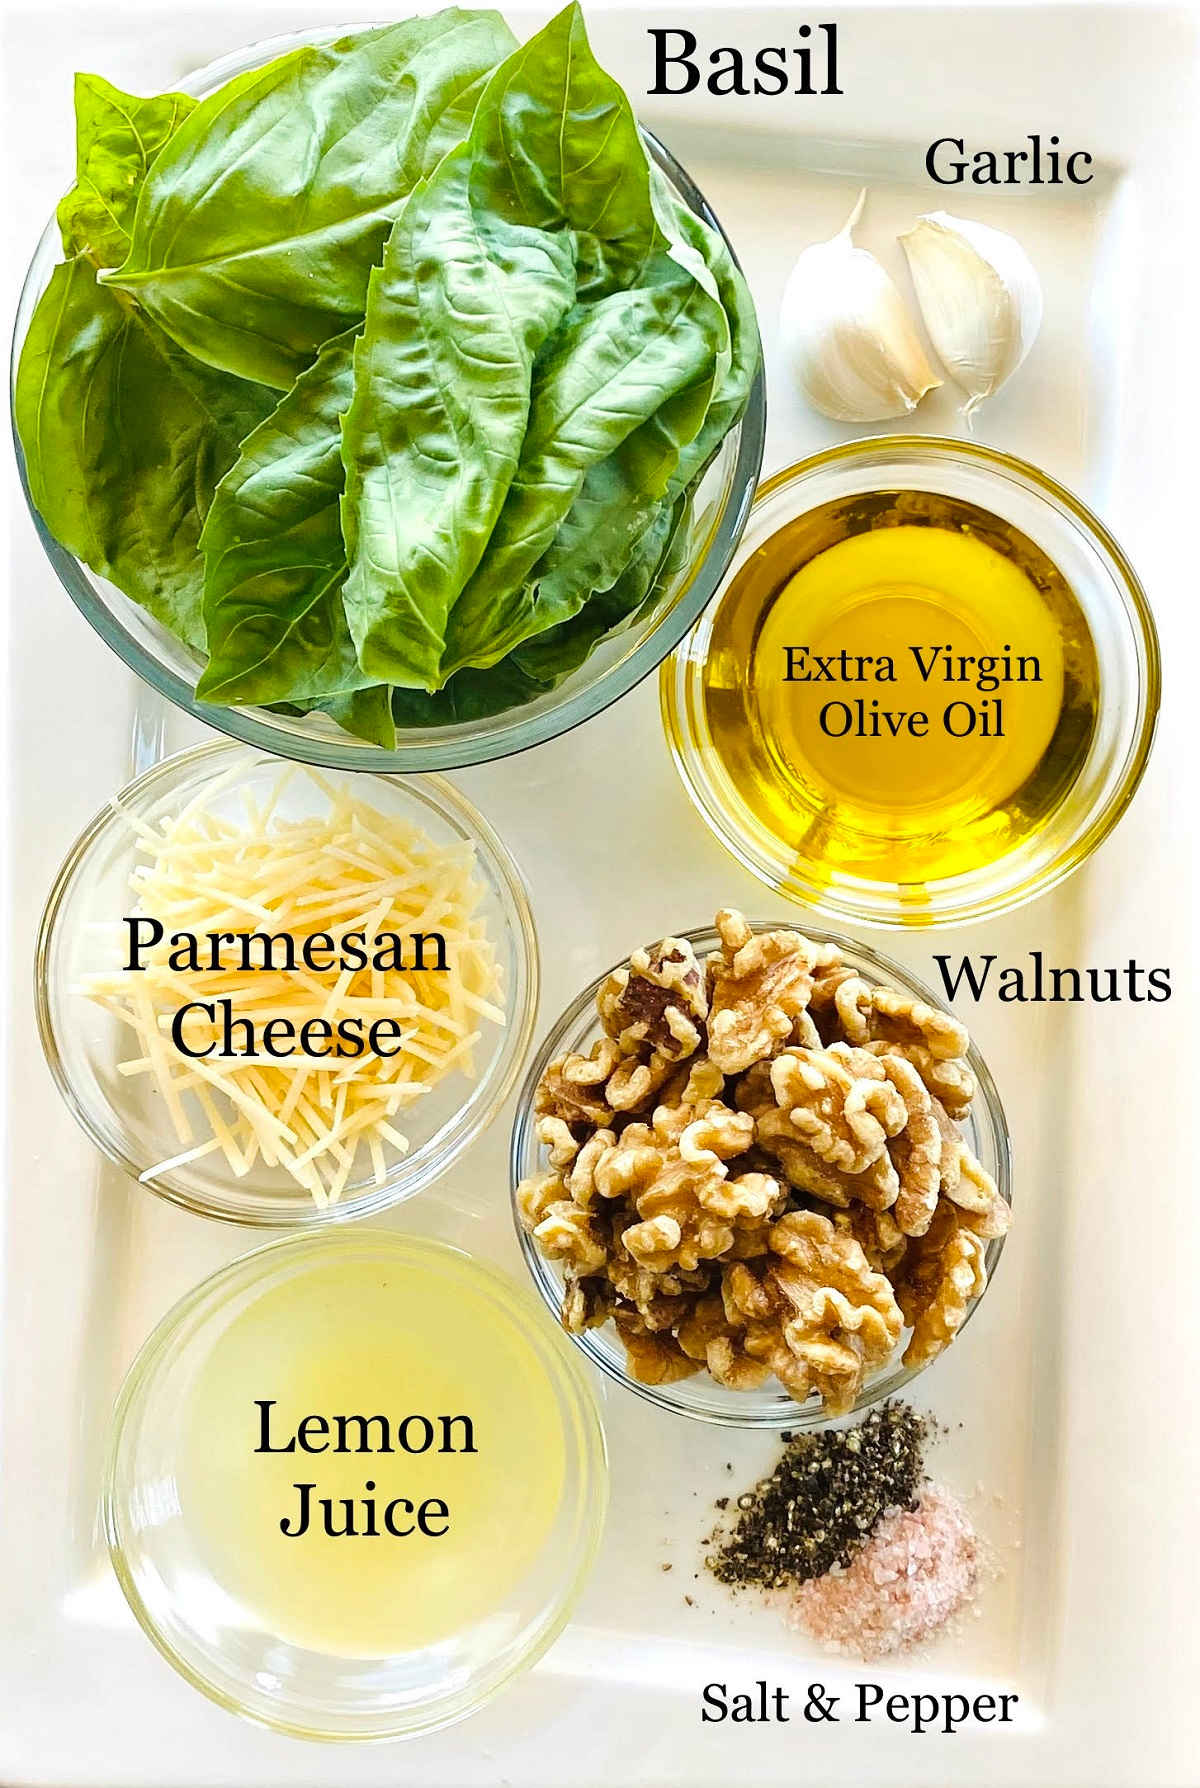 labeled ingredients to make pesto without pine nuts.